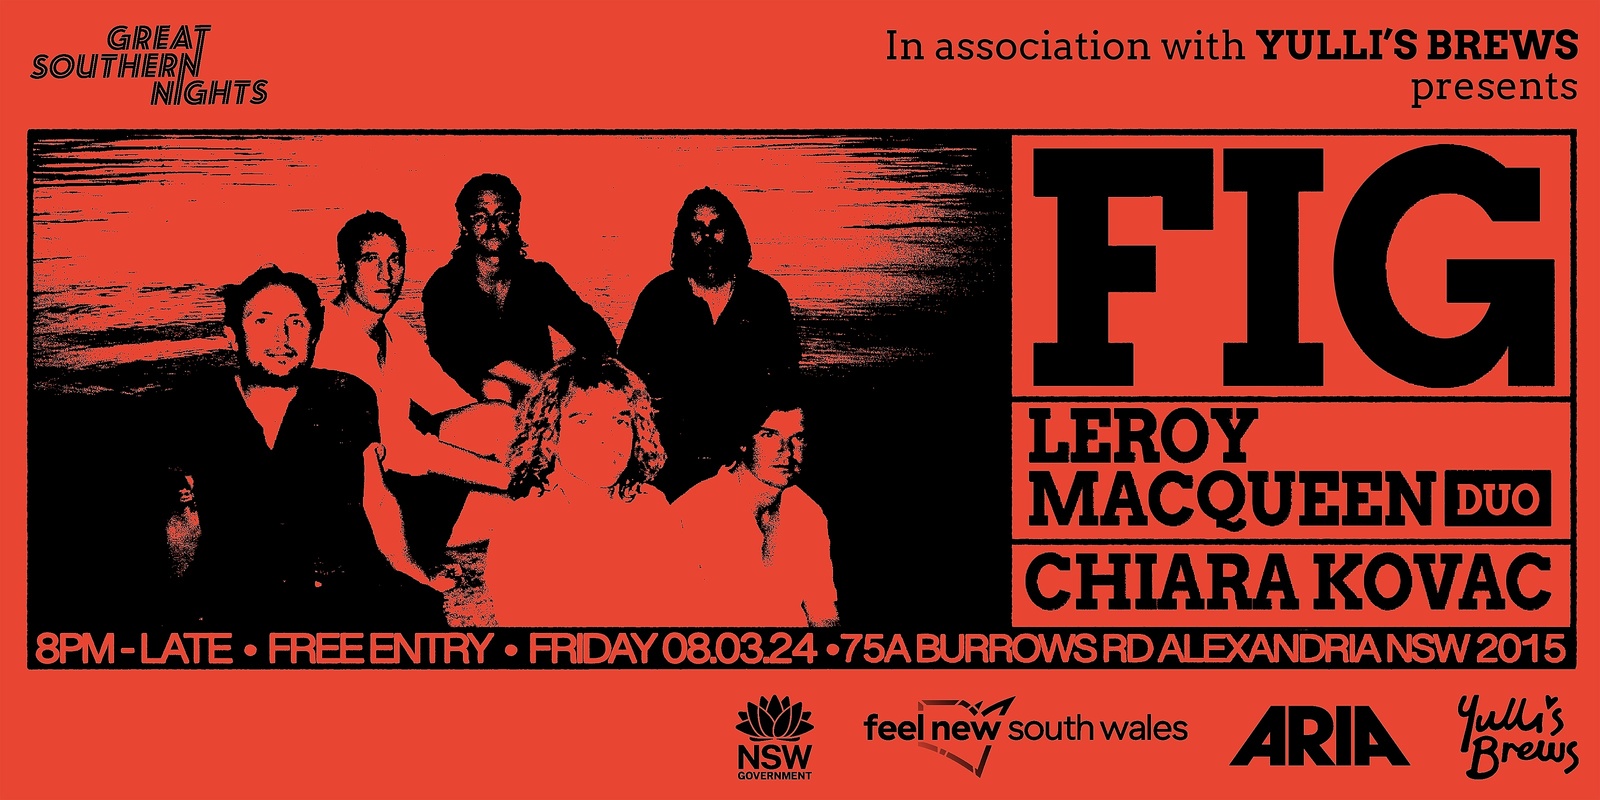 Banner image for Great Southern Nights x Yulli's Brews present; Fig, Leroy Macqueen & Chiara Kovac.